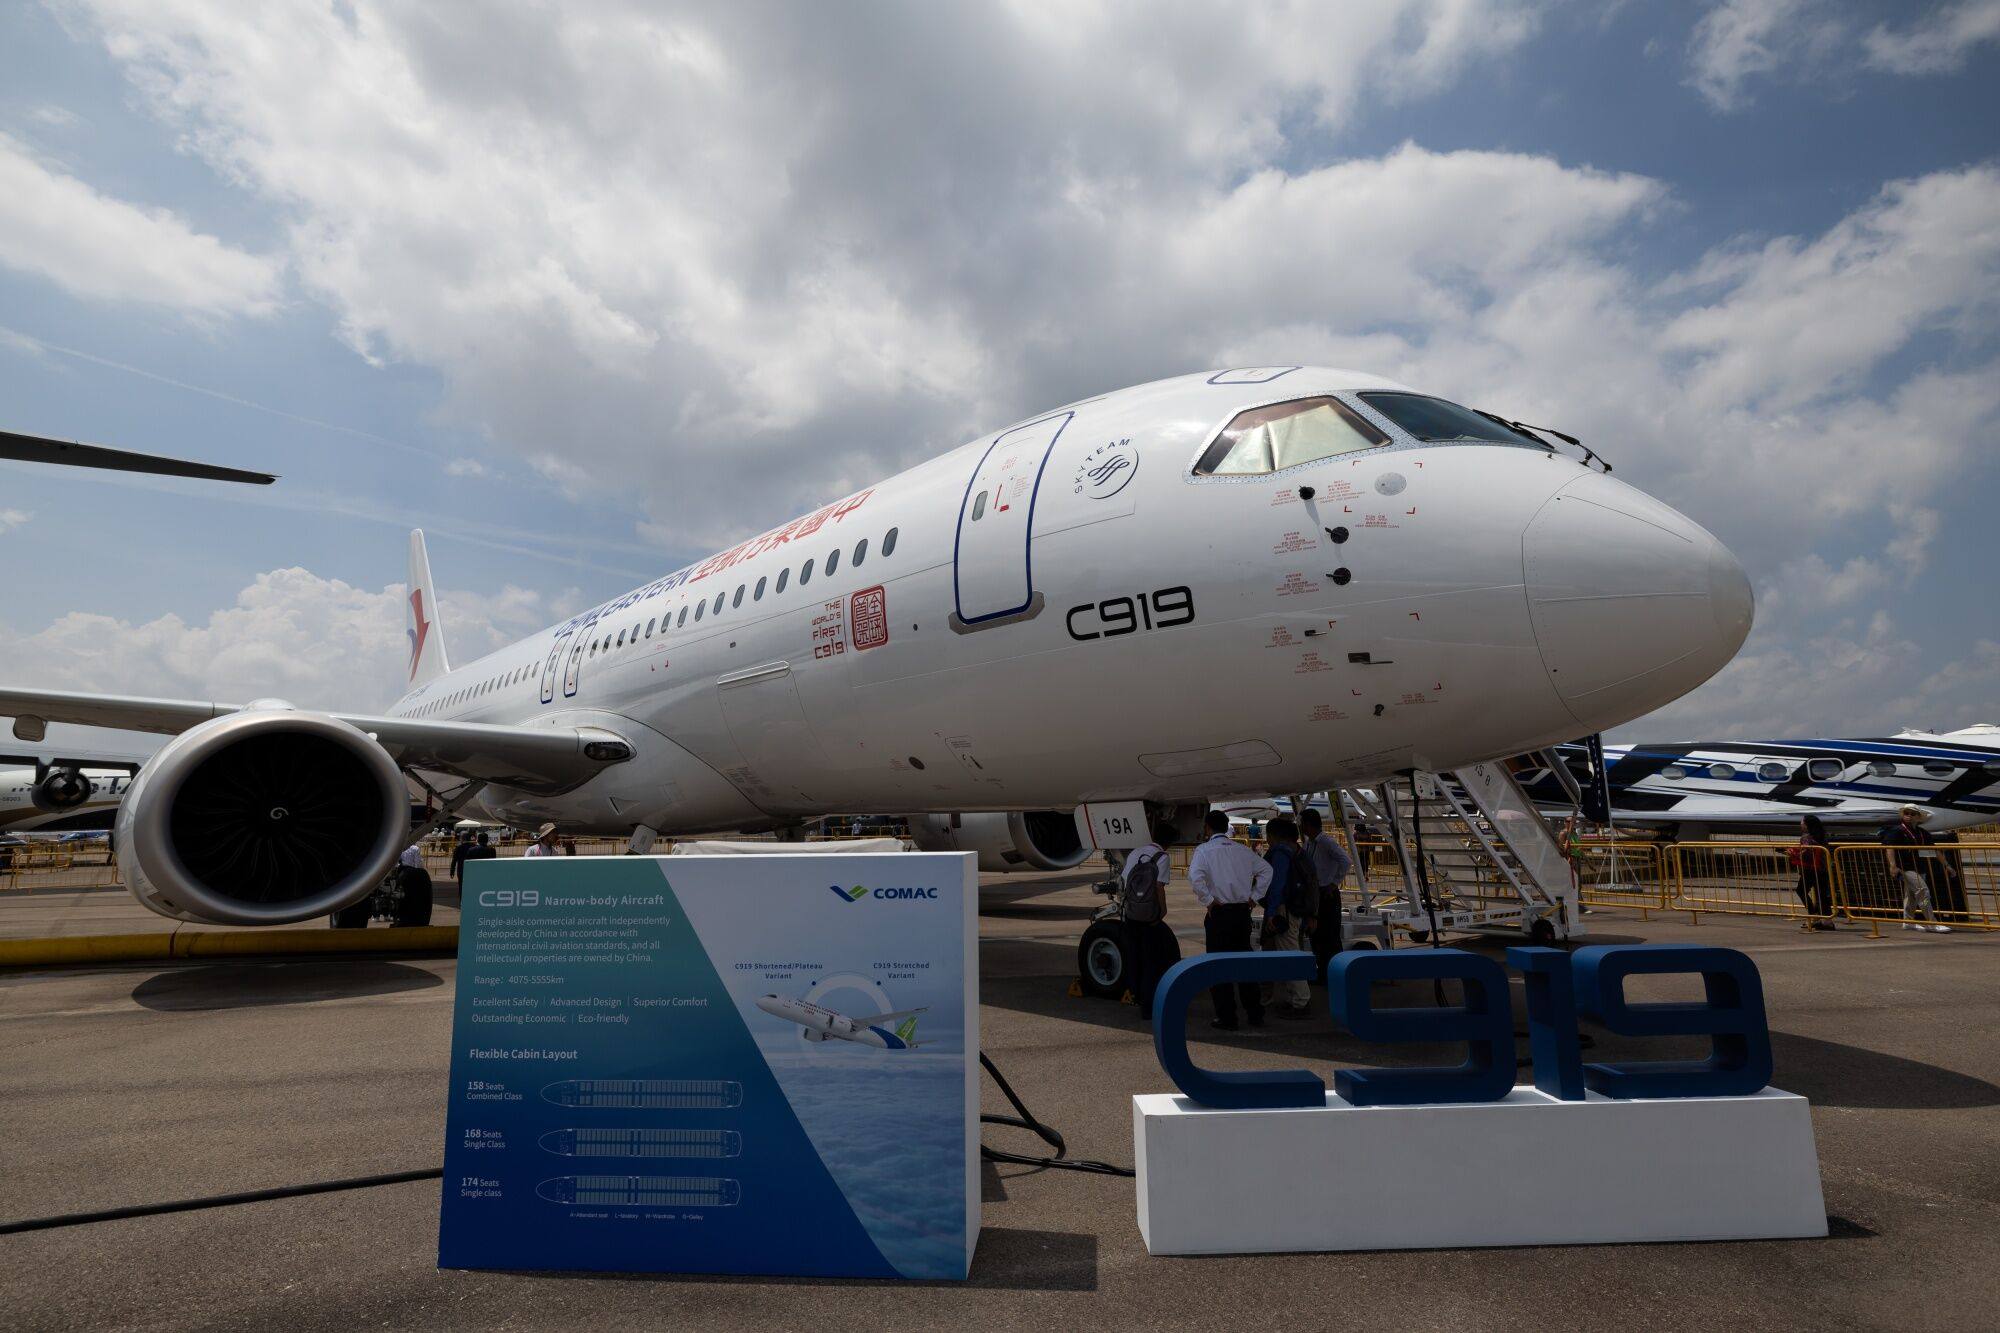 A C919 aircraft operated by China Eastern Airlines during the Singapore Airshow in Singapore. Photo: Bloomberg